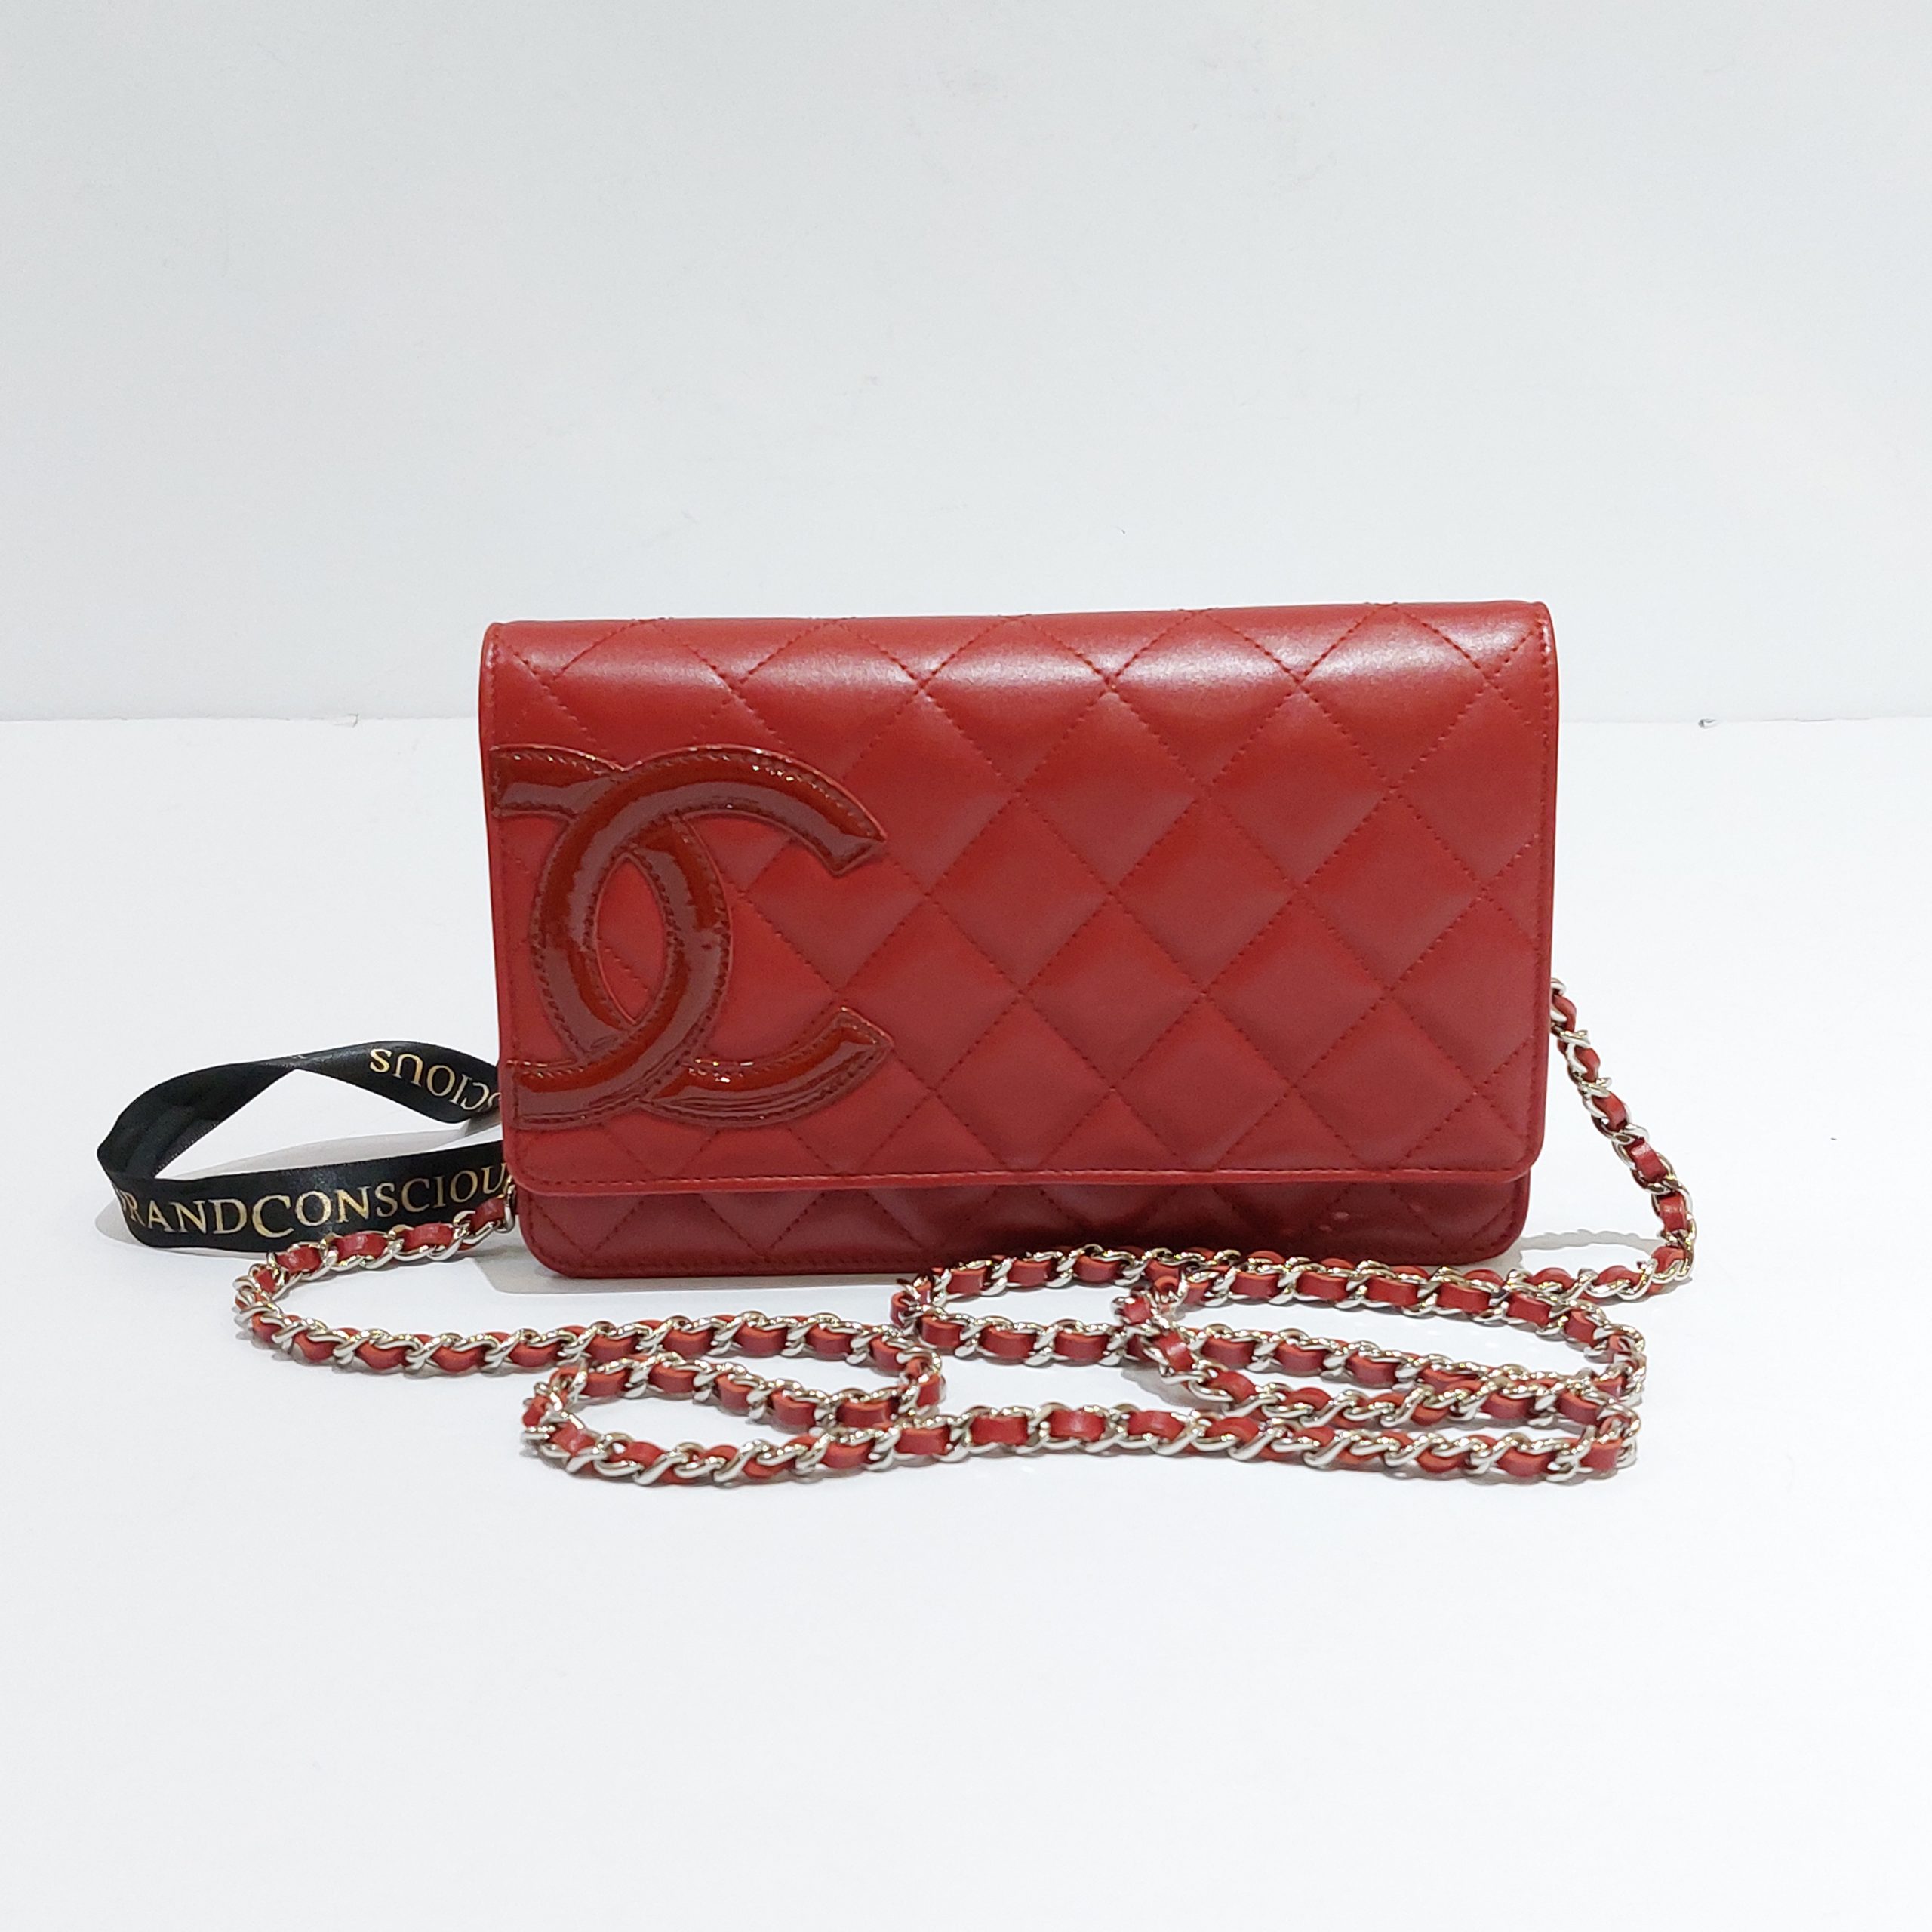 Chanel - Calfskin Quilted Cambon Red / Silver Wallet On Chain - Crossbody -  BrandConscious Authentics